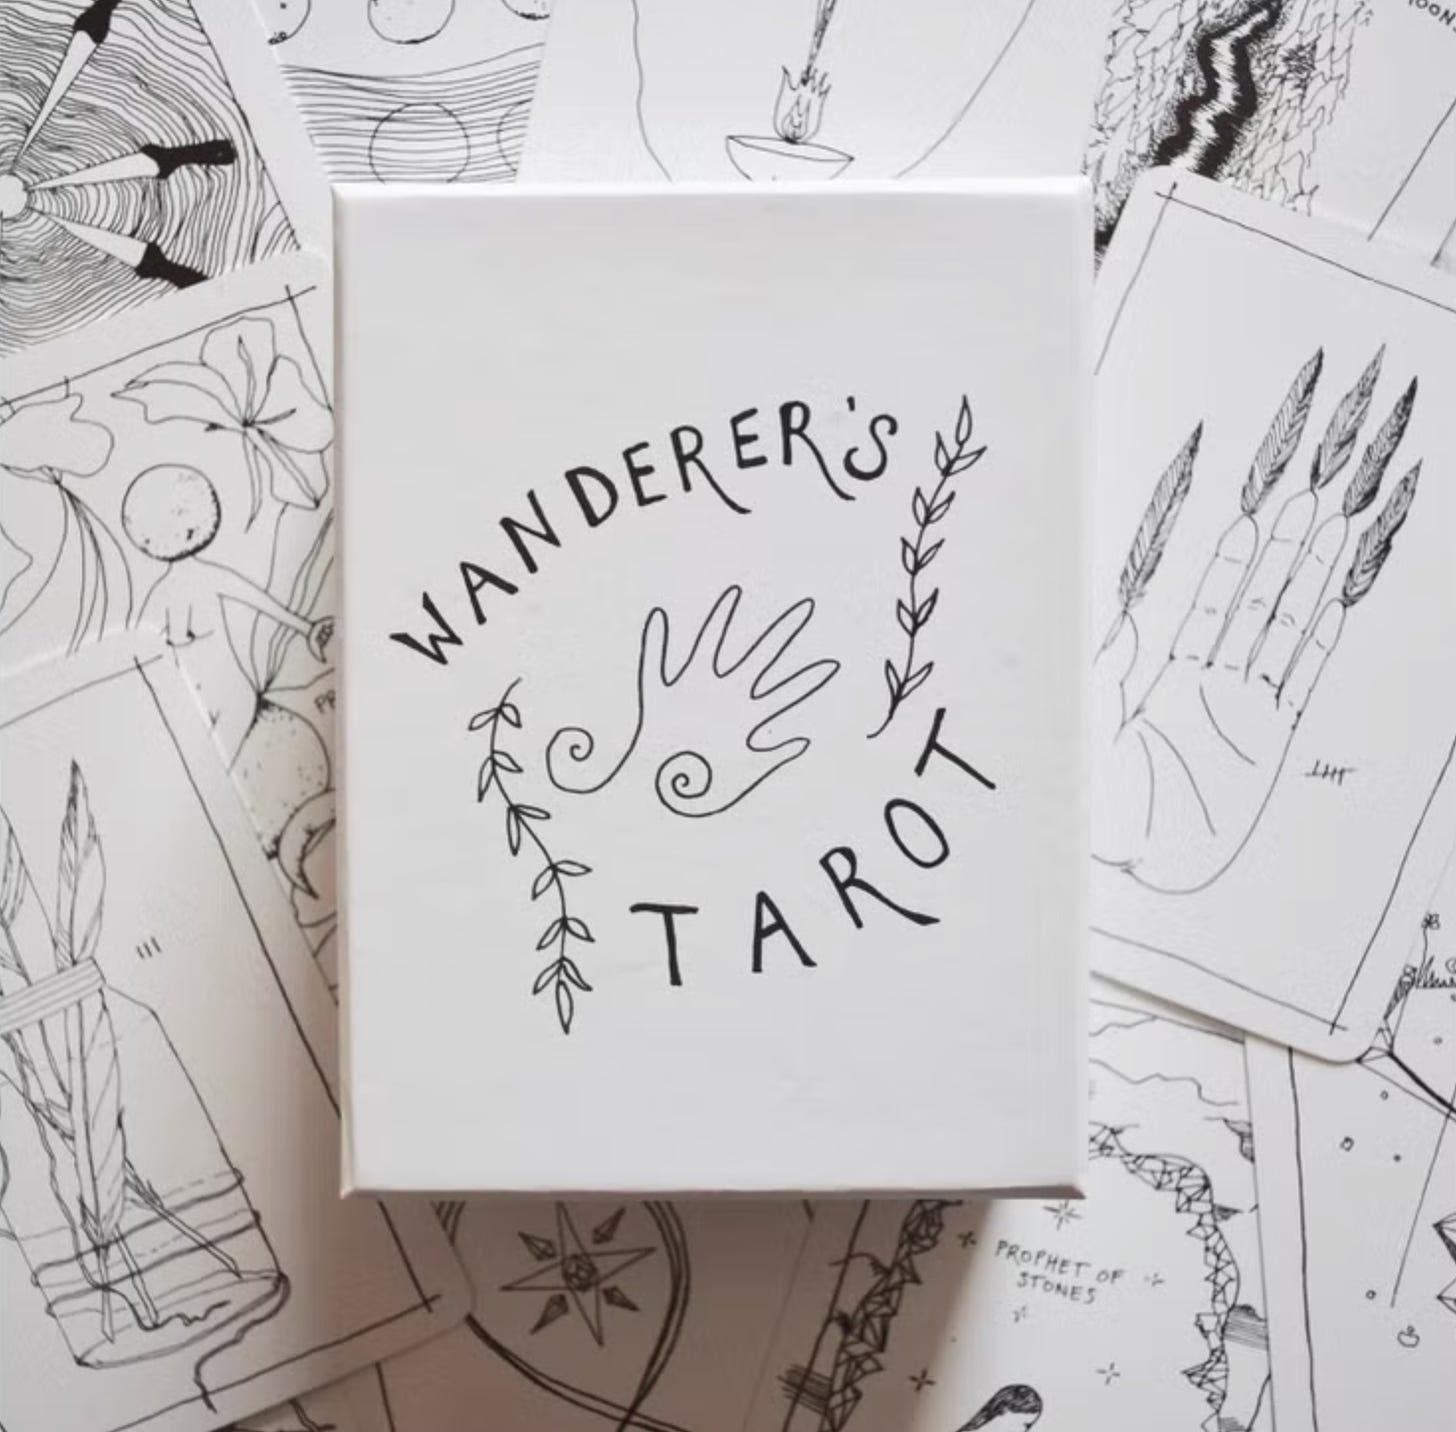 A photo of the Wanderer's Tarot deck (Solar edition), featuring a bunch of tarot cards illustrated with black sketches and the case for the deck in the center.